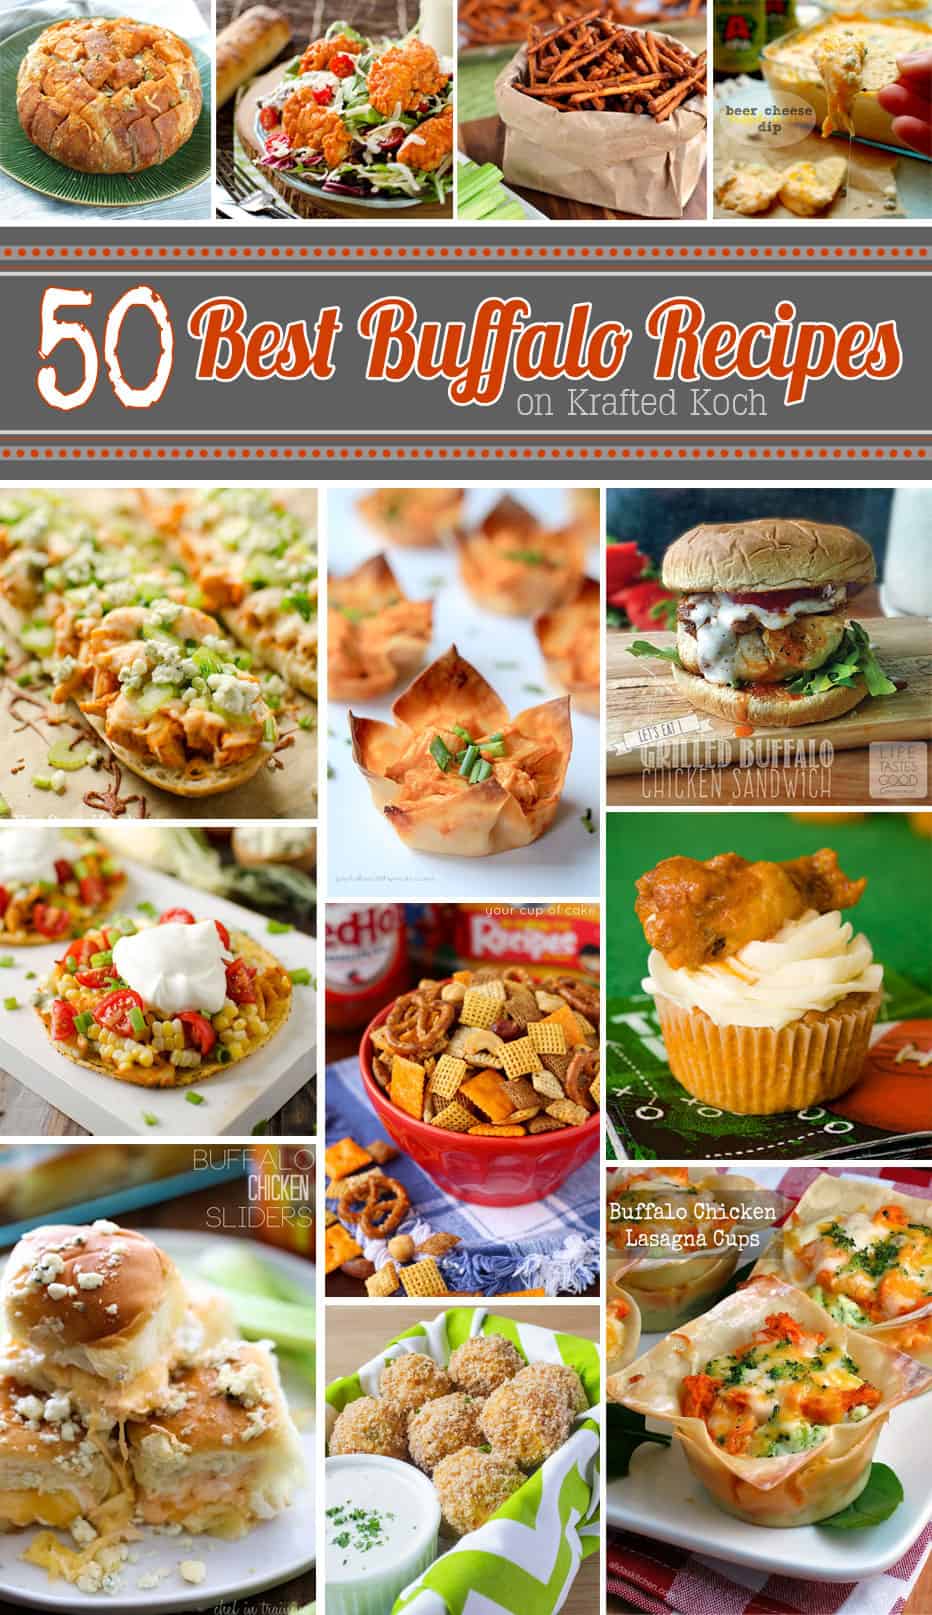 50 Best Buffalo Flavored Recipes Round Up - Krafted Koch - From game day snacks, to savory appetizers and cheesy dinner recipes, these buffalo recipes kick up the flavor!